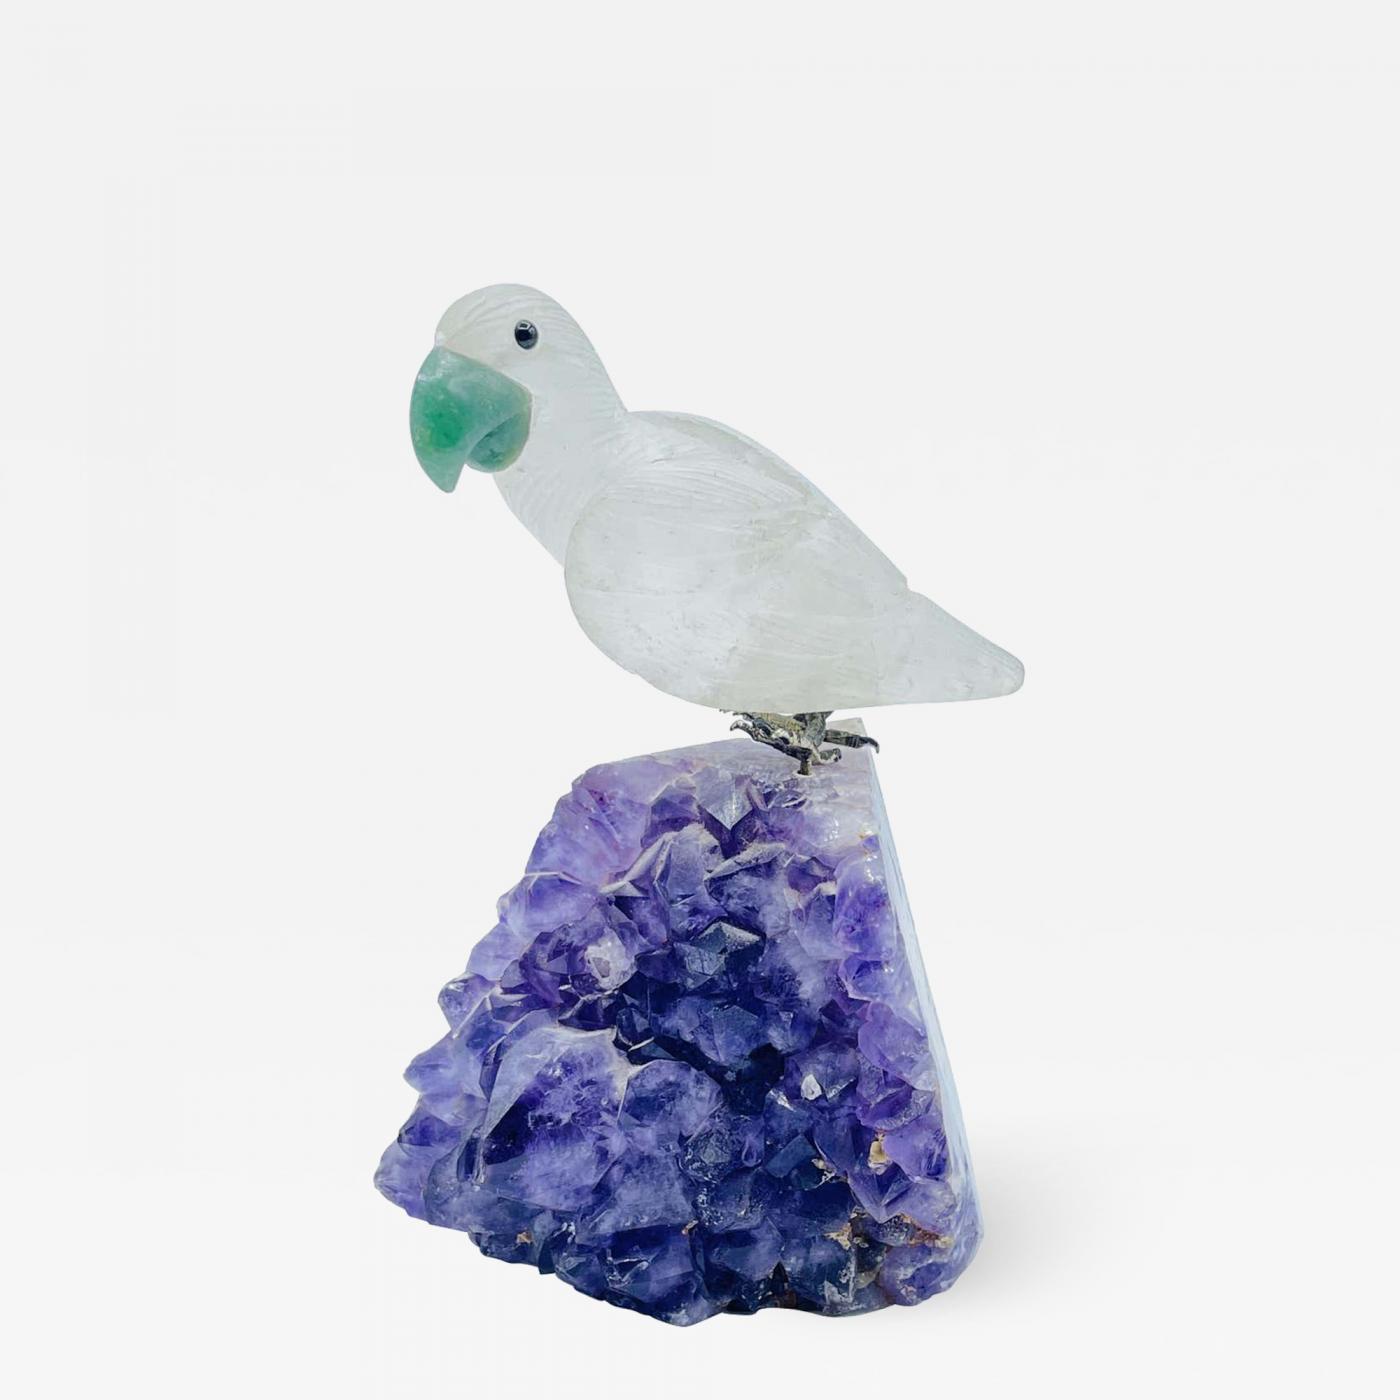 Rock Crystal and Amethyst Geode Sculpture of A Carved Parrot Bird